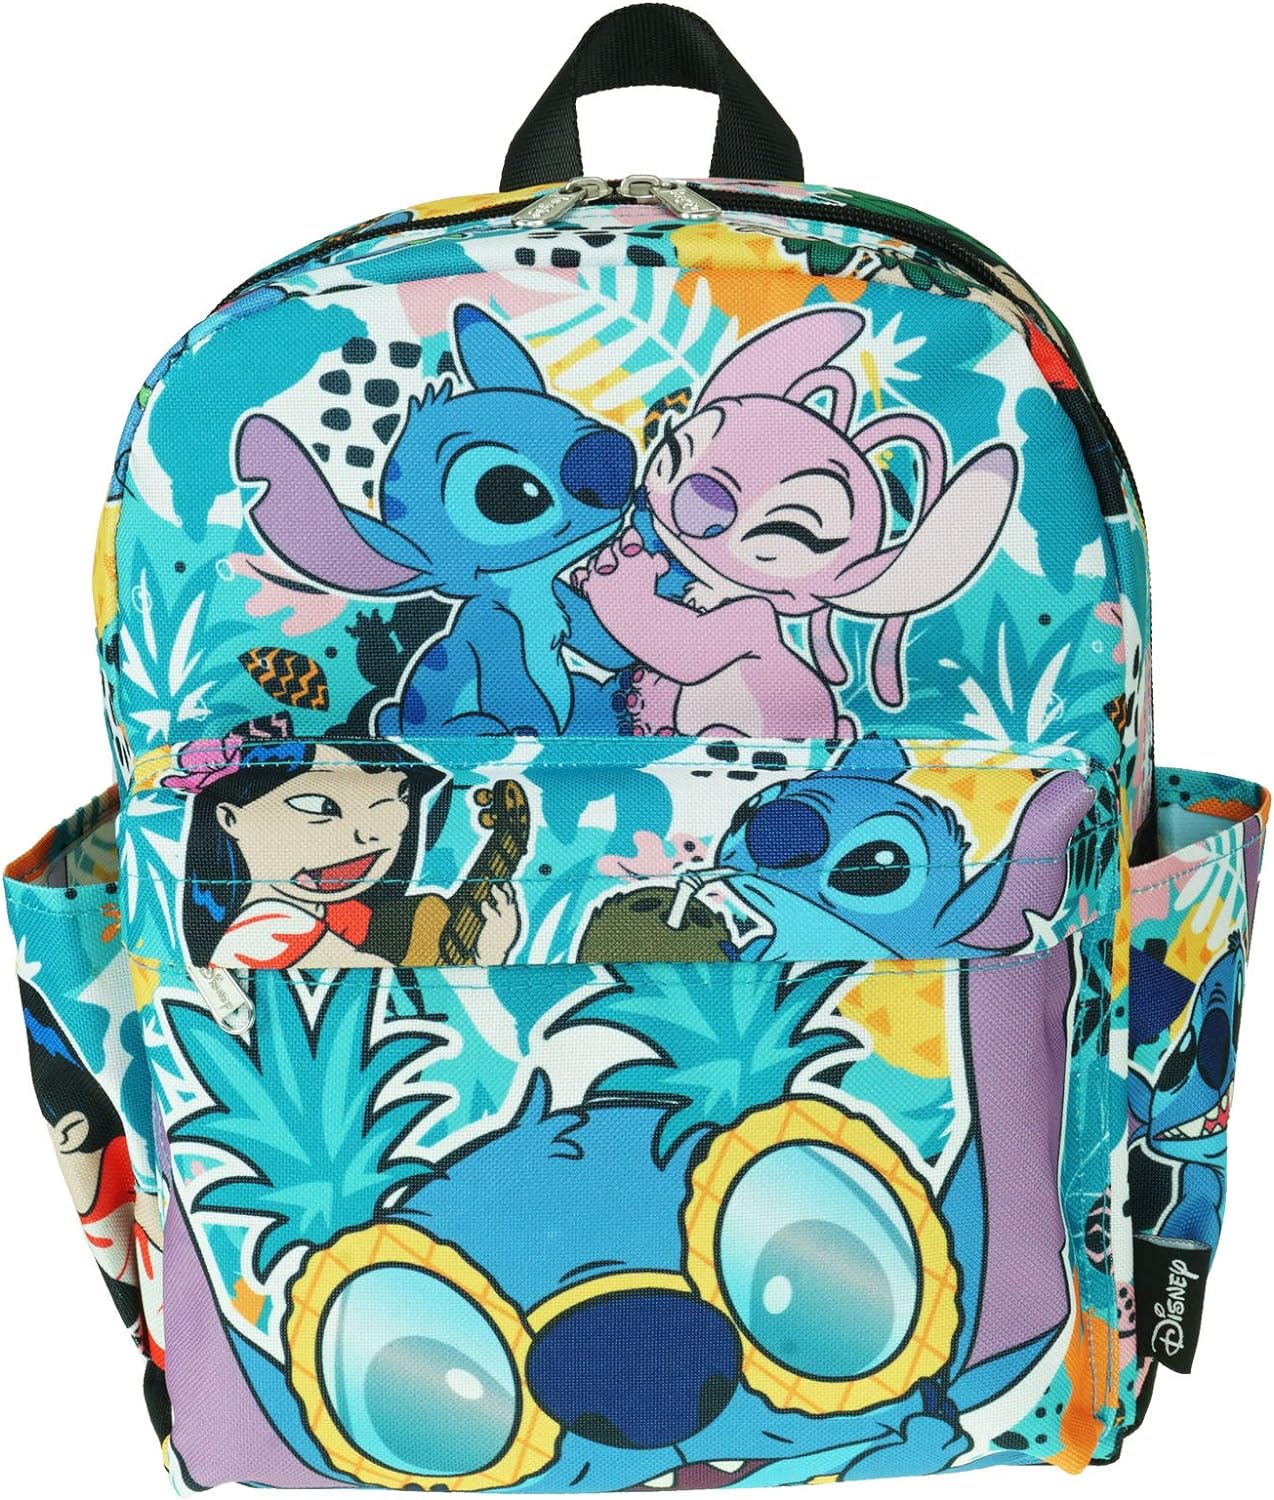 Lilo & Stitch 12-inch Deluxe Print Backpack- A21273